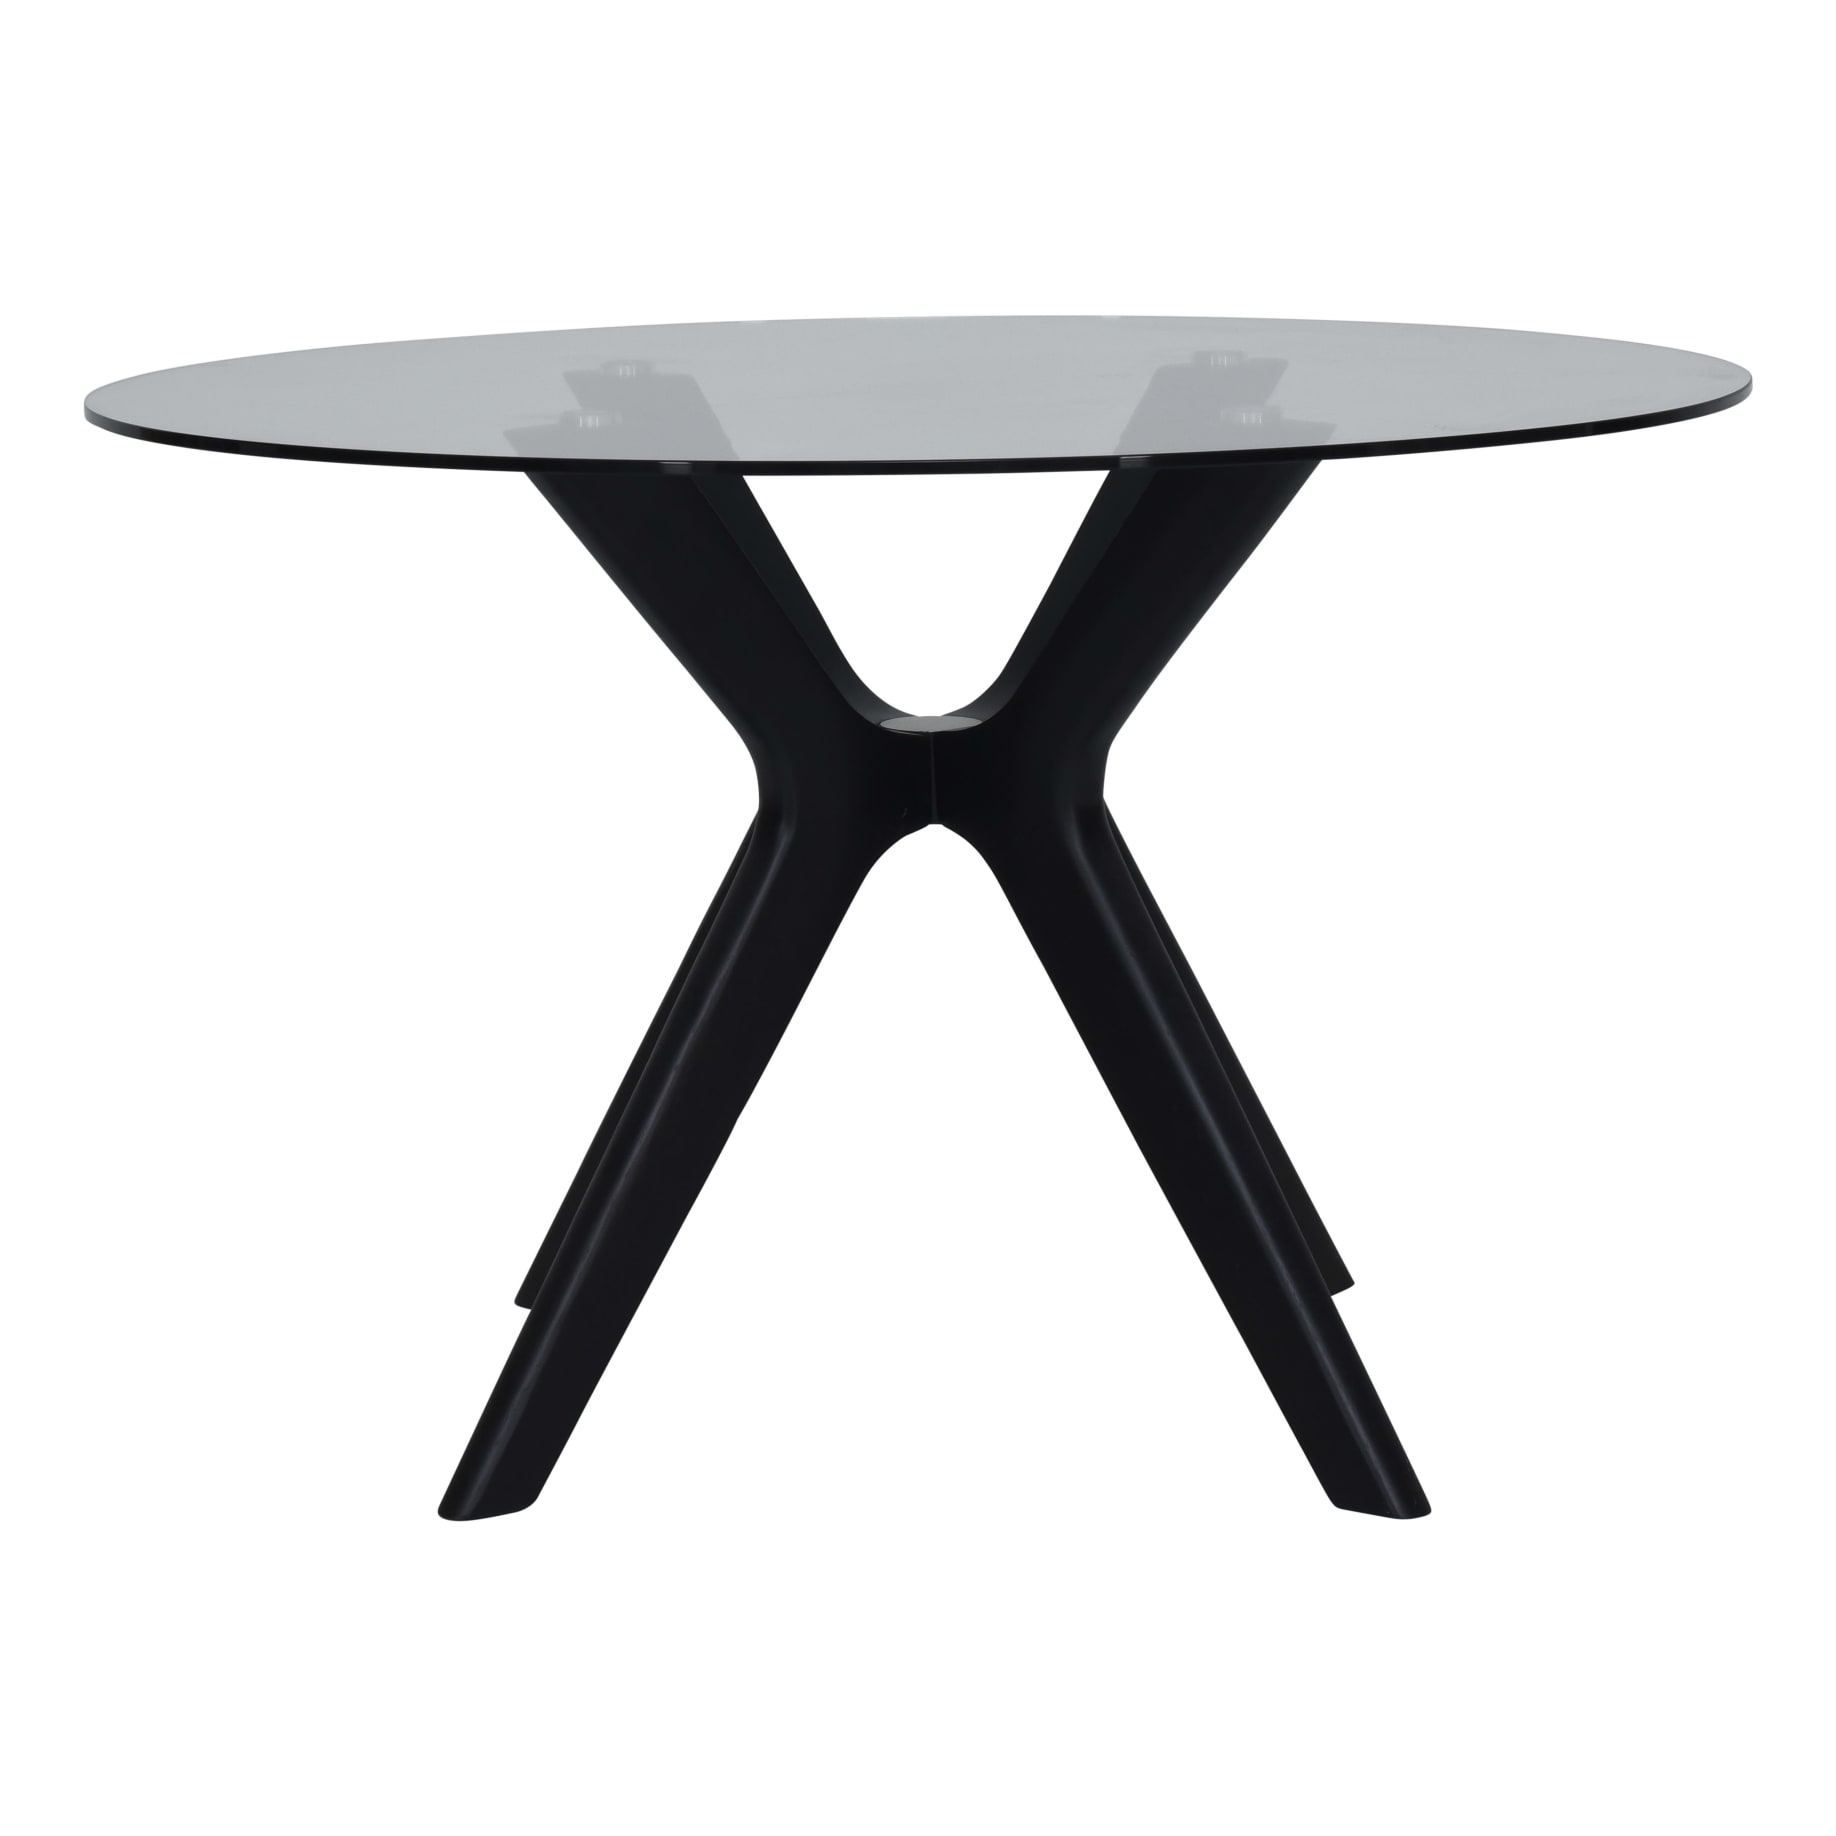 Padma Round 120cm Dining Table in Glass/Black